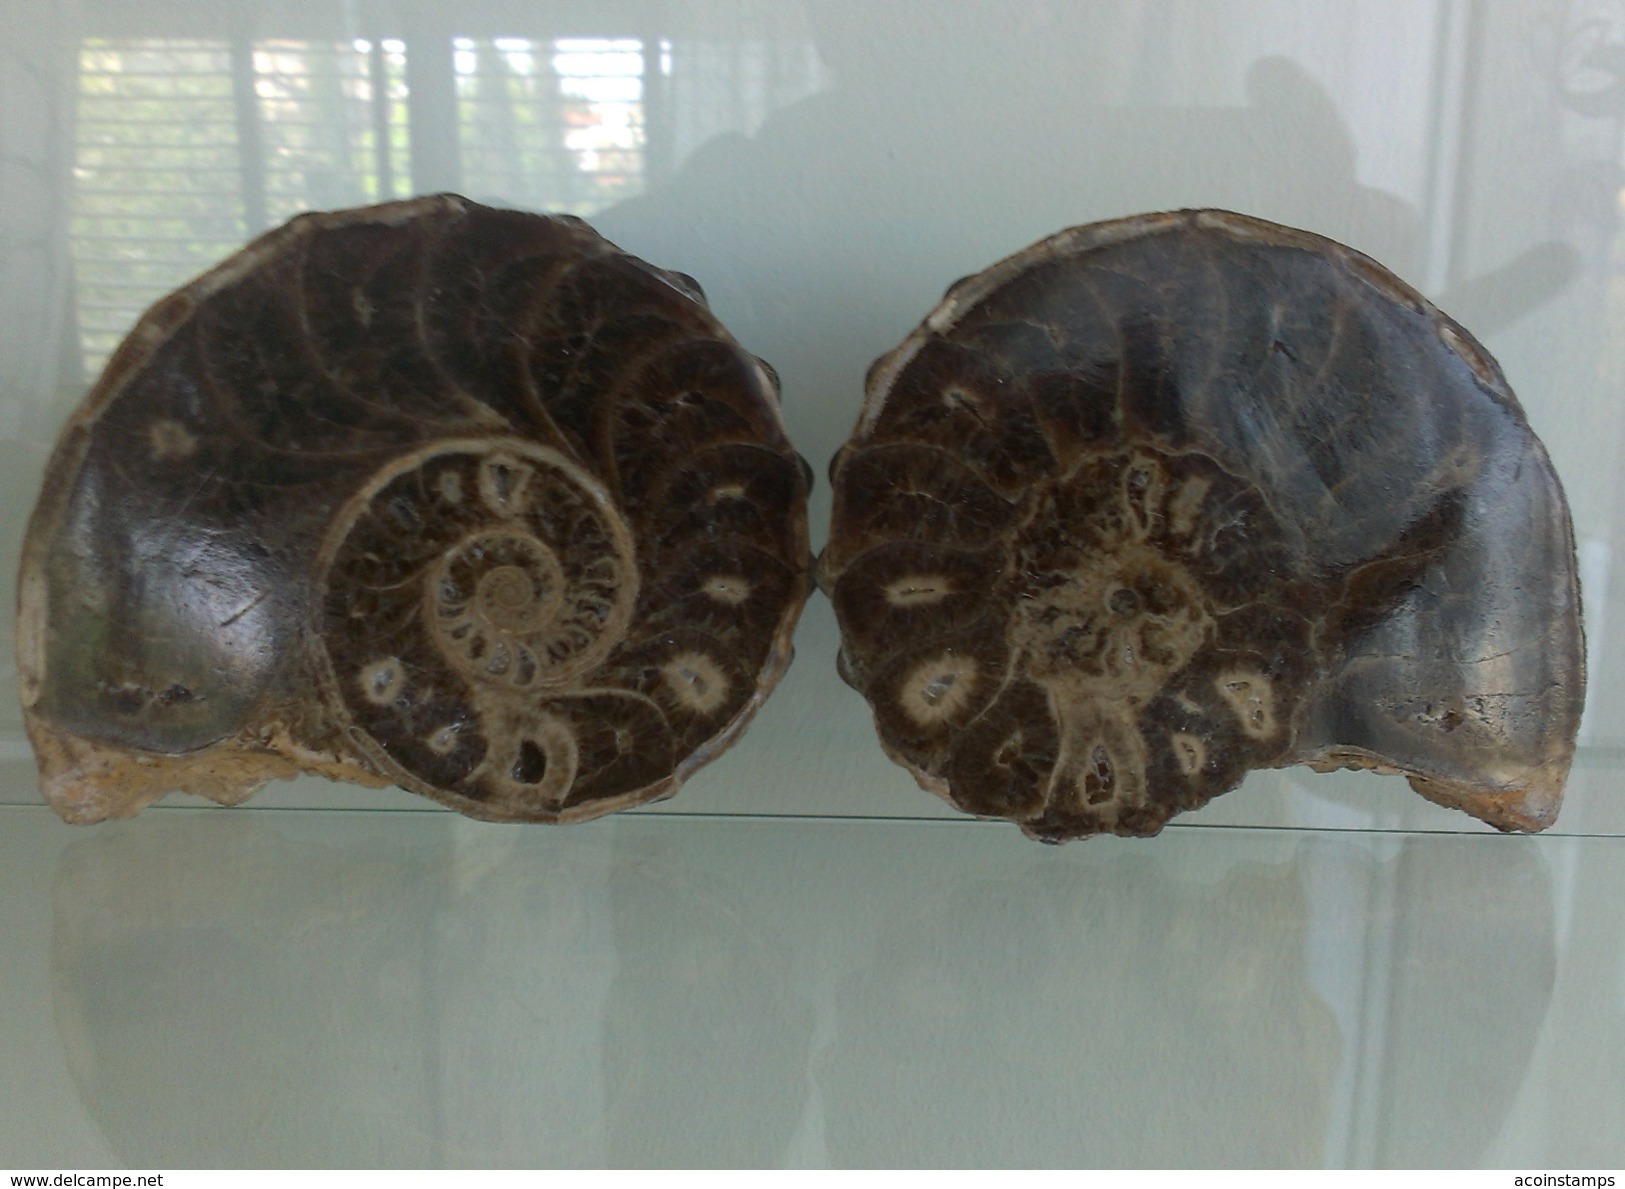 RARE AMMONITE MOLLUSK FOSSIL From MOROCCO 300 Million Years Old Seashell Shell - Fossils